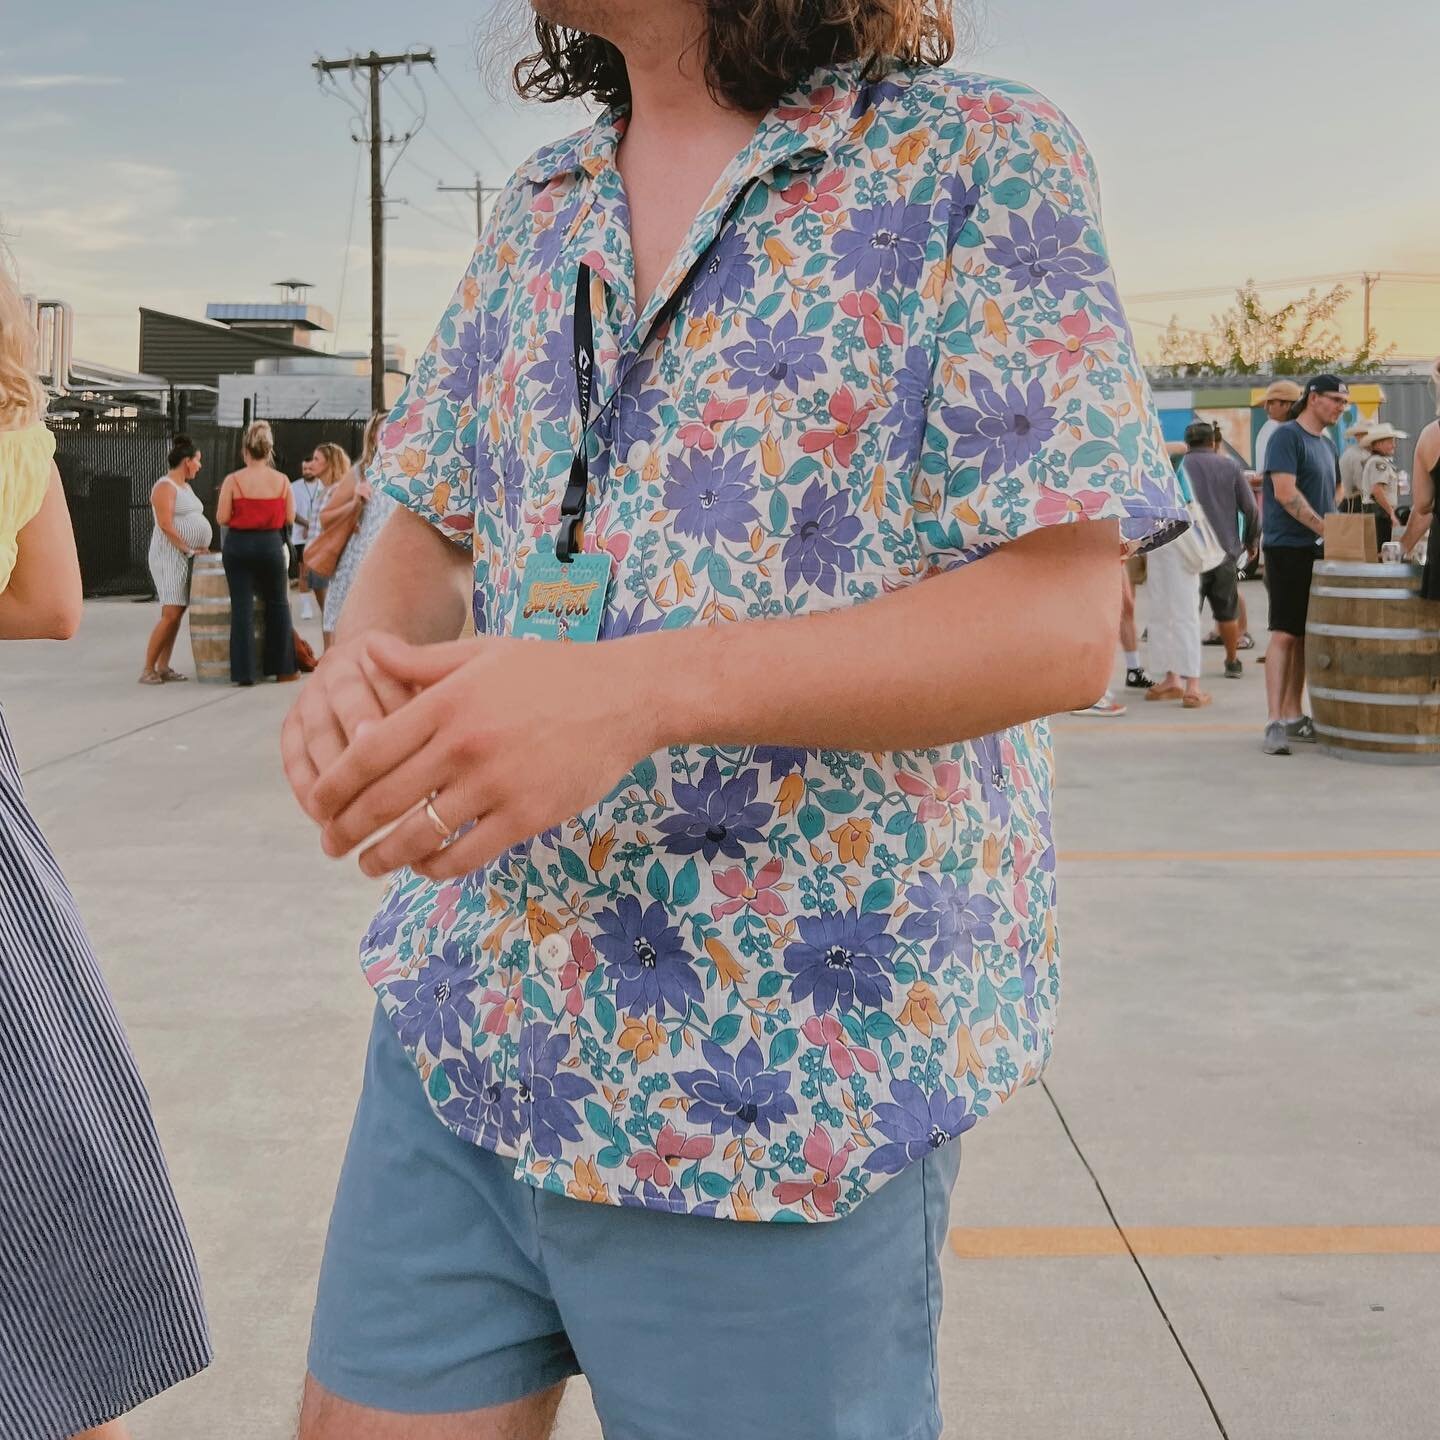 outfitted this @theinkcaps for Surf Fest &amp; got to watch him rip a solo in a handmade button down 🍄 made from a funky vintage floral via. estate sale.
Thx for being my paper doll @dc.washington
-LL